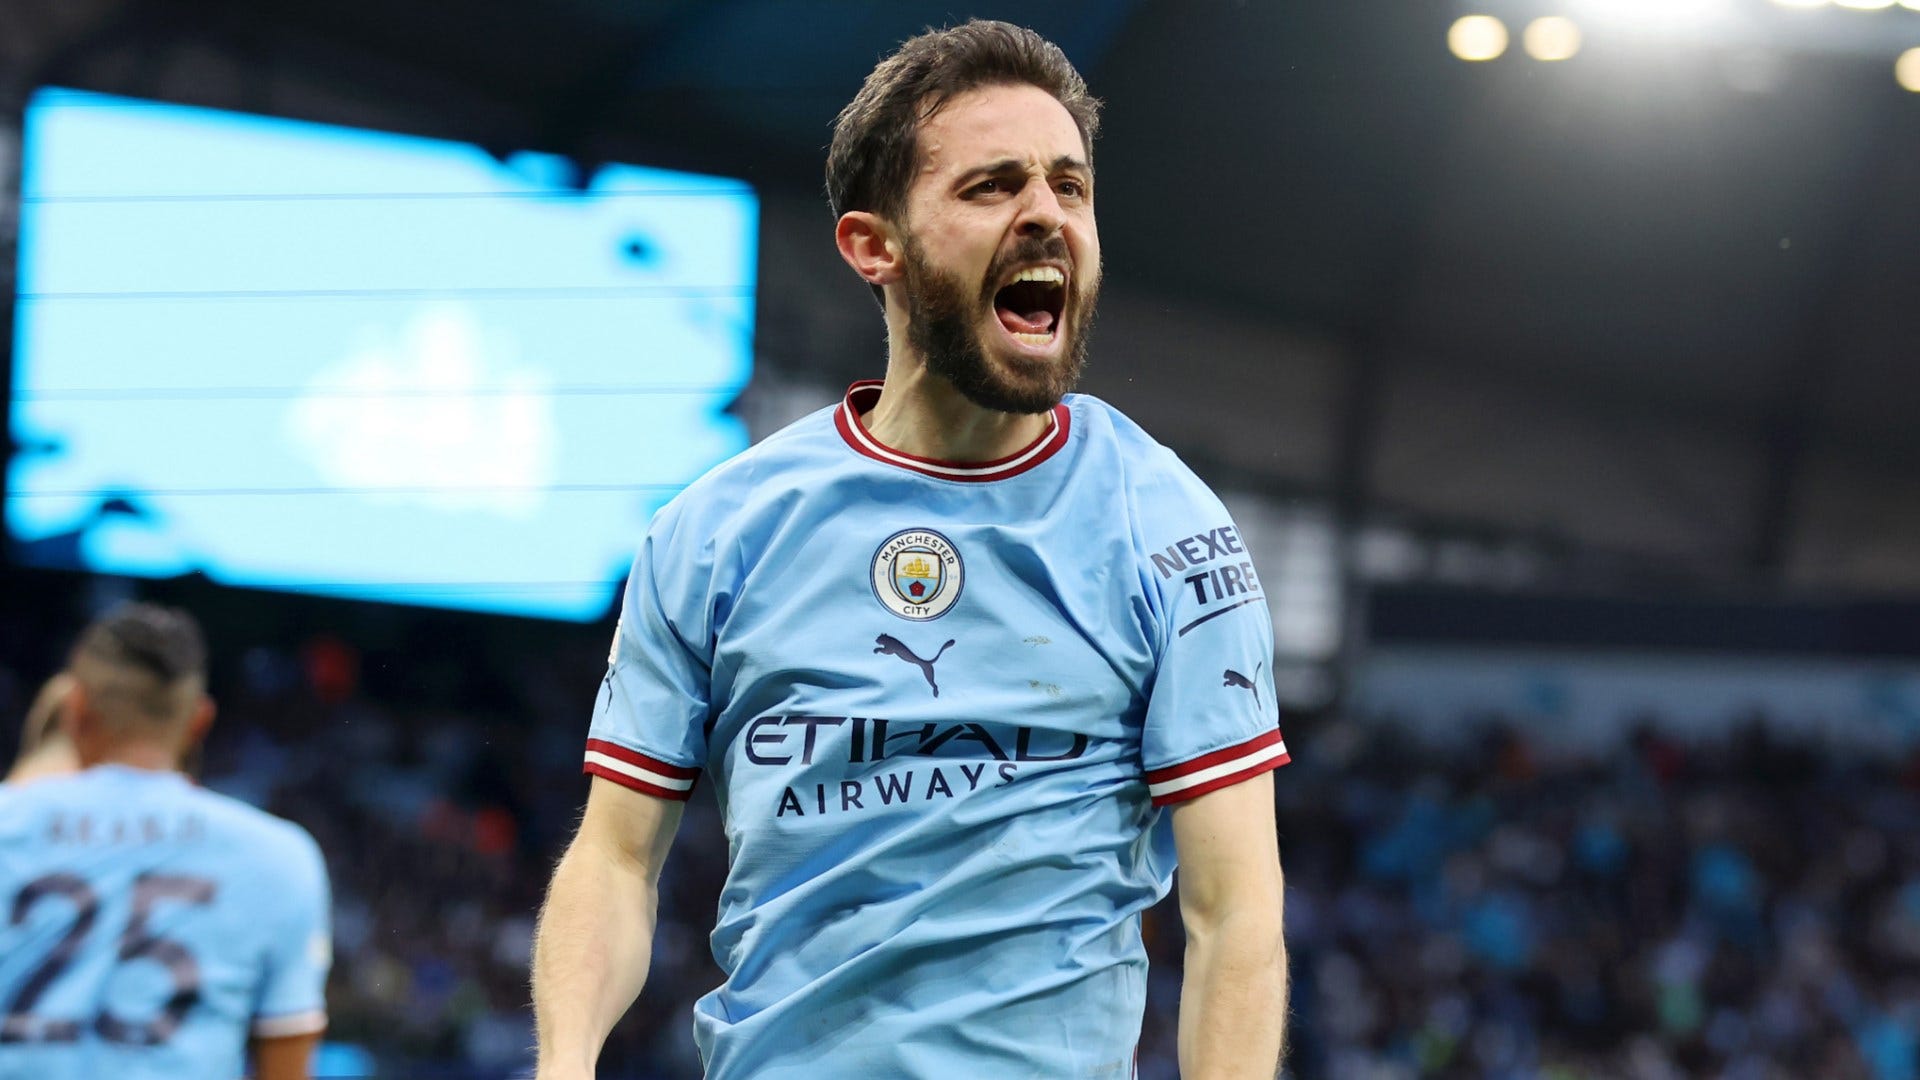 Hands off! Man City officially inform Barcelona and PSG that Bernardo Silva is not for sale as they ready new contract offer | Goal.com UK